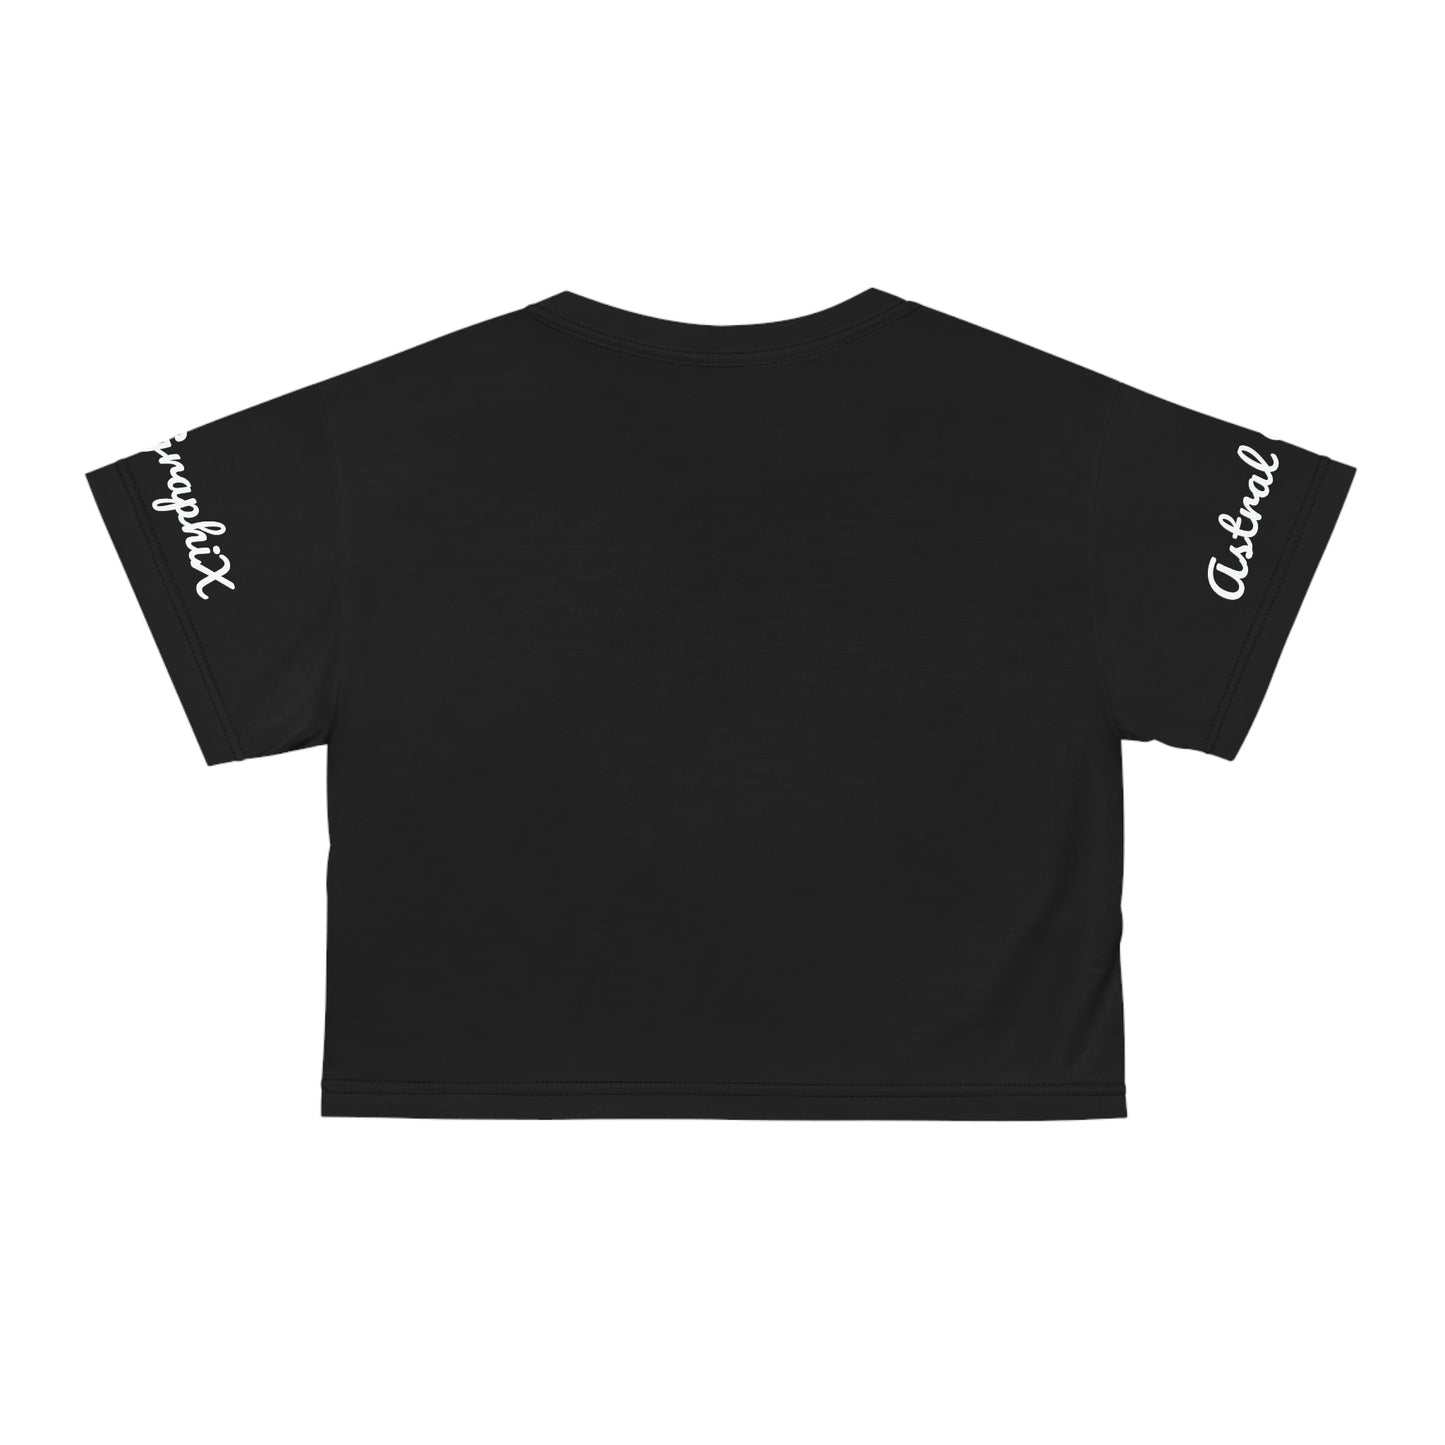 Word Art Collection - AOP Crop Tee - Good Vibes v1 in Black